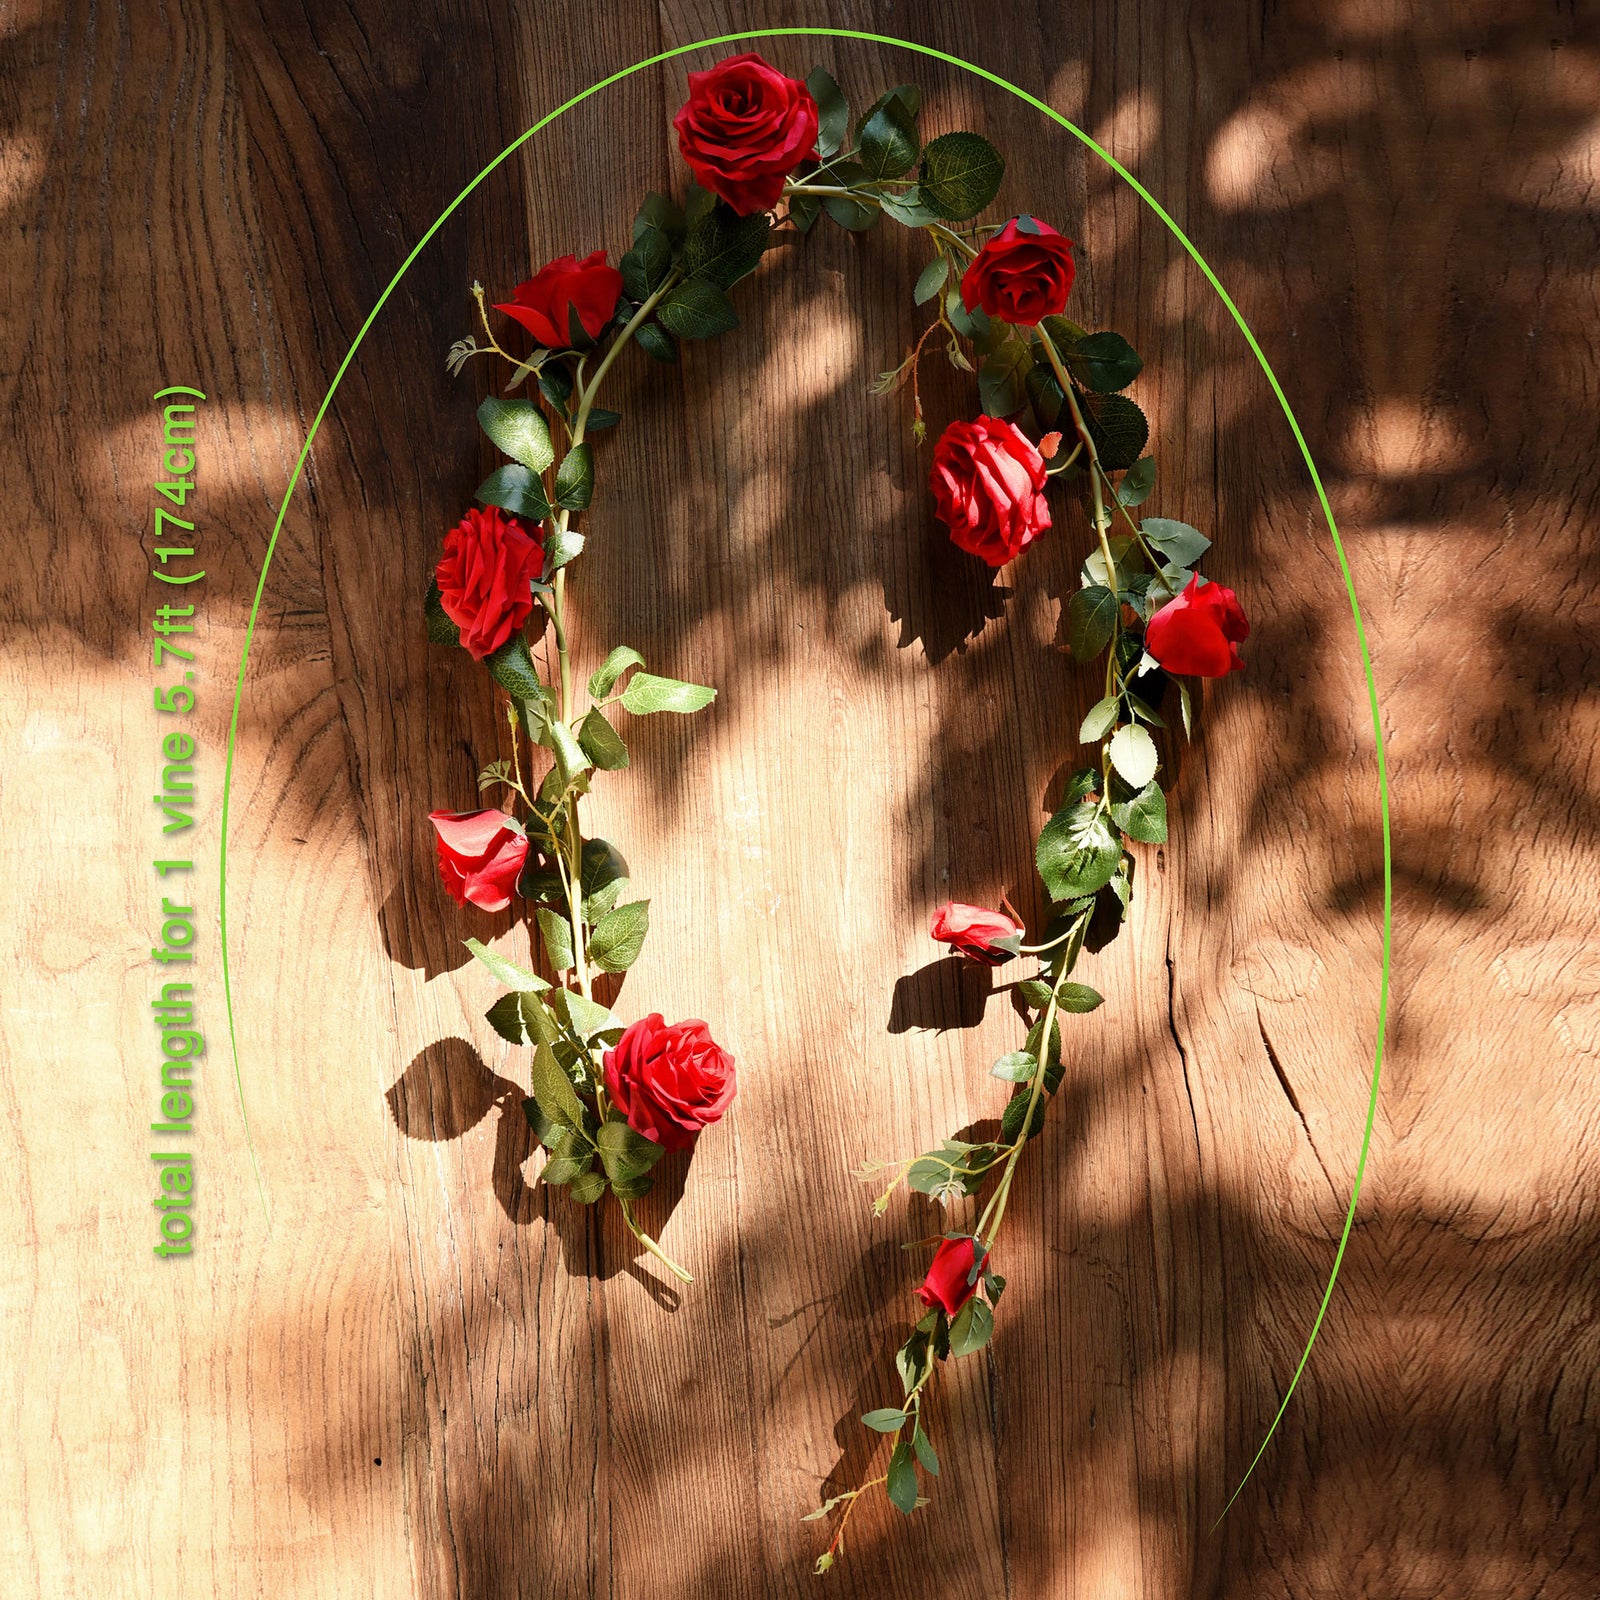 FiveSeasonStuff 2 Pcs Bendable Flower Garland Artificial Silk Rose Vine Leaves Hanging Face Flowers for Wall Decoration, Wreaths (Red)